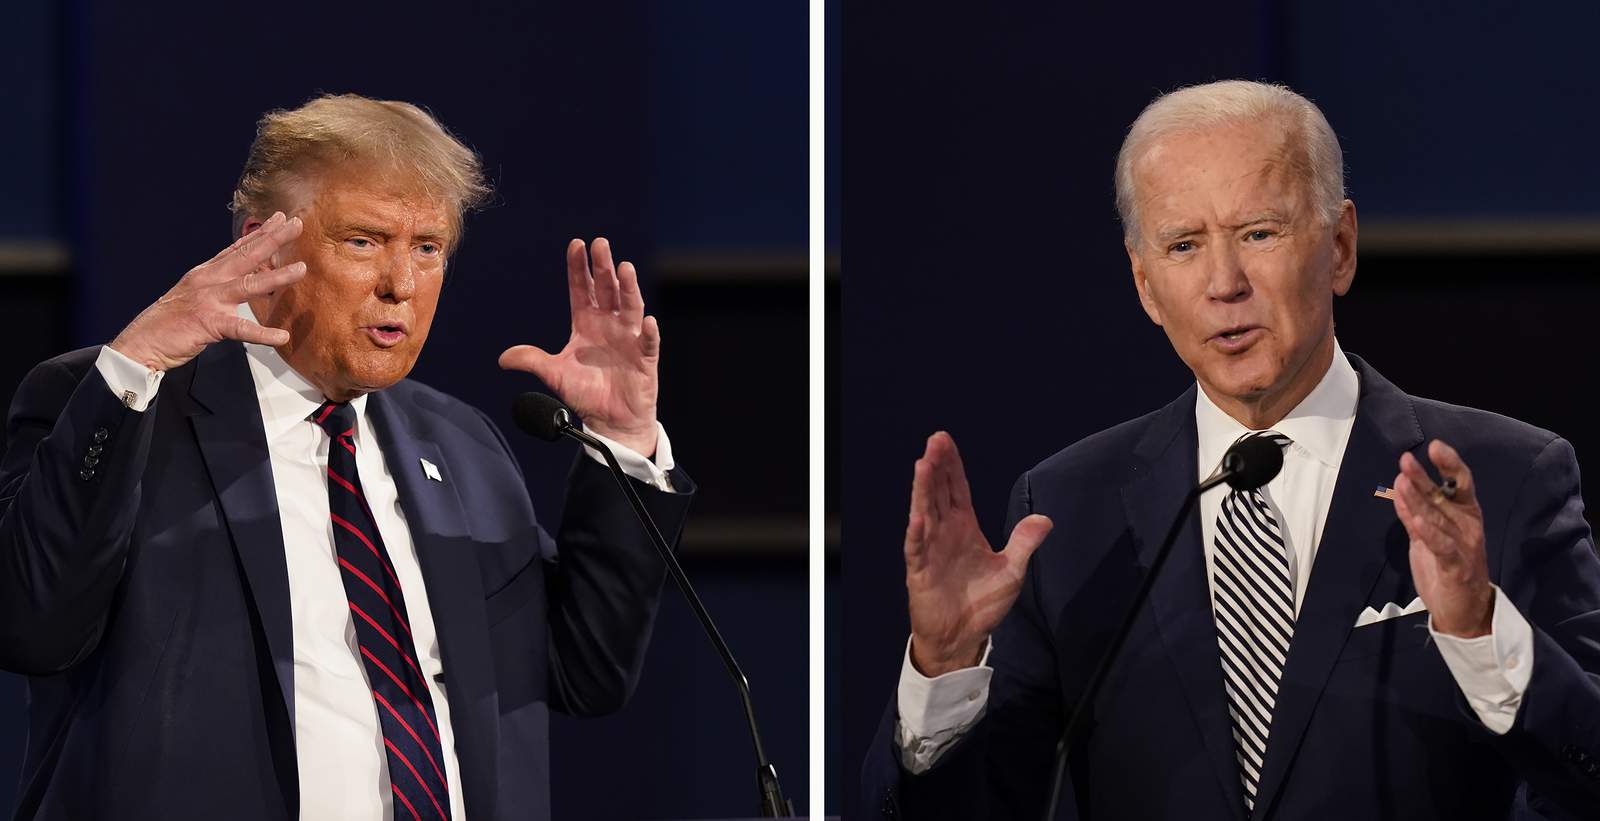 AP FACT CHECK: Claims from Trump and Biden’s first debate